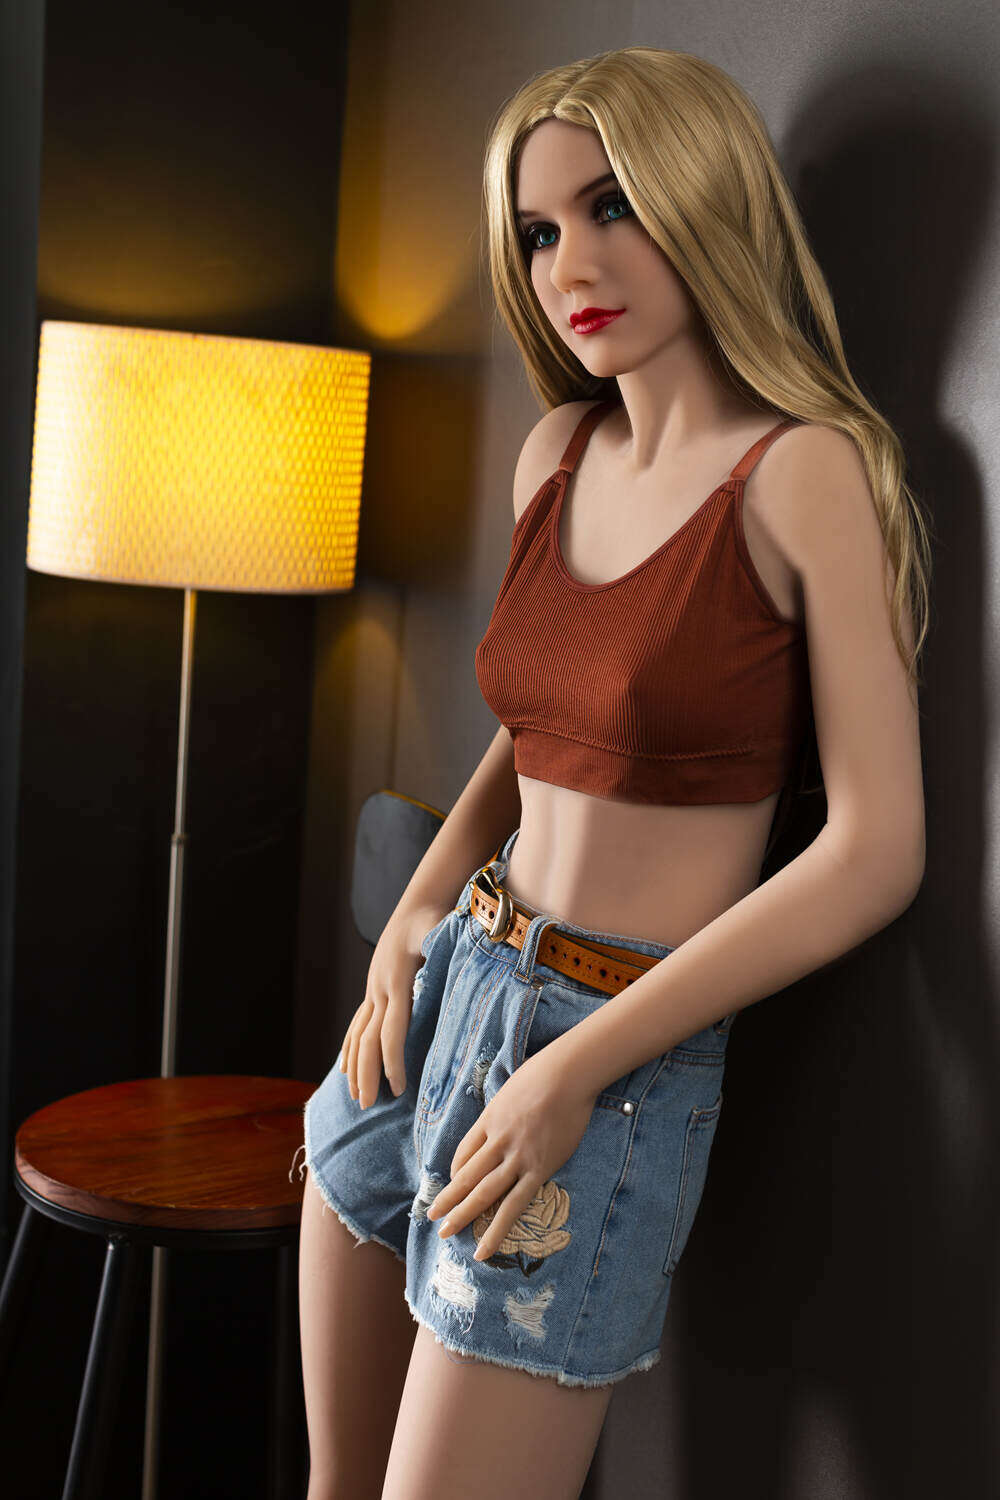 Seductive Big Eyes A-Cup Ayvah Playful TPE 166cm(5ft5) Adult Love Doll (US In Stock) image5